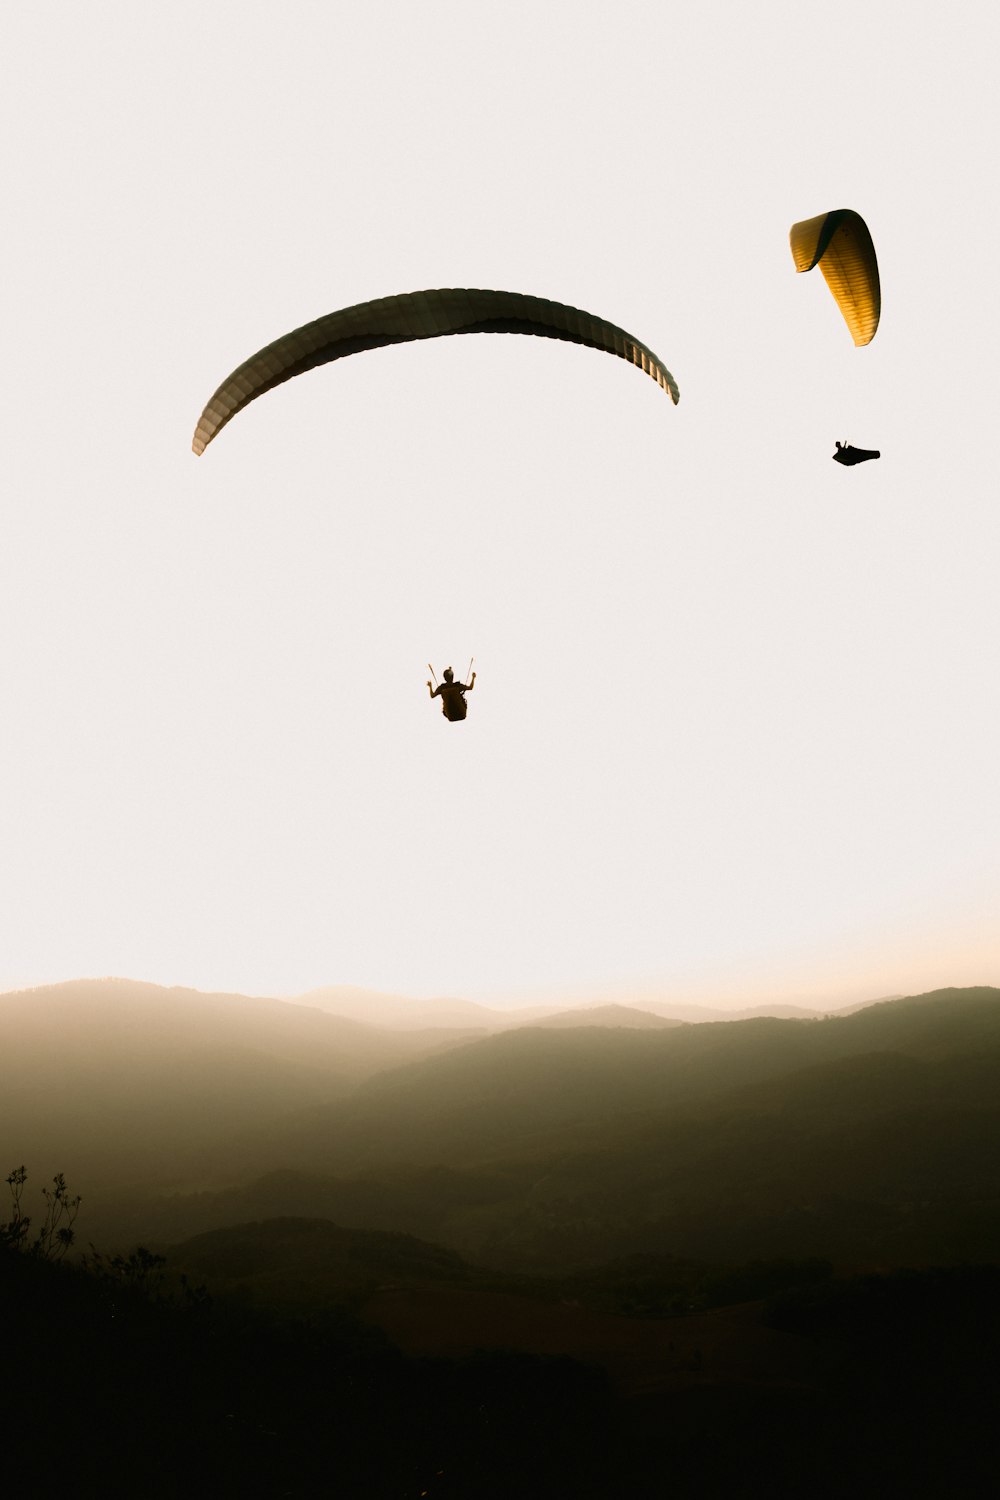 silhouette of person riding parachute during night time